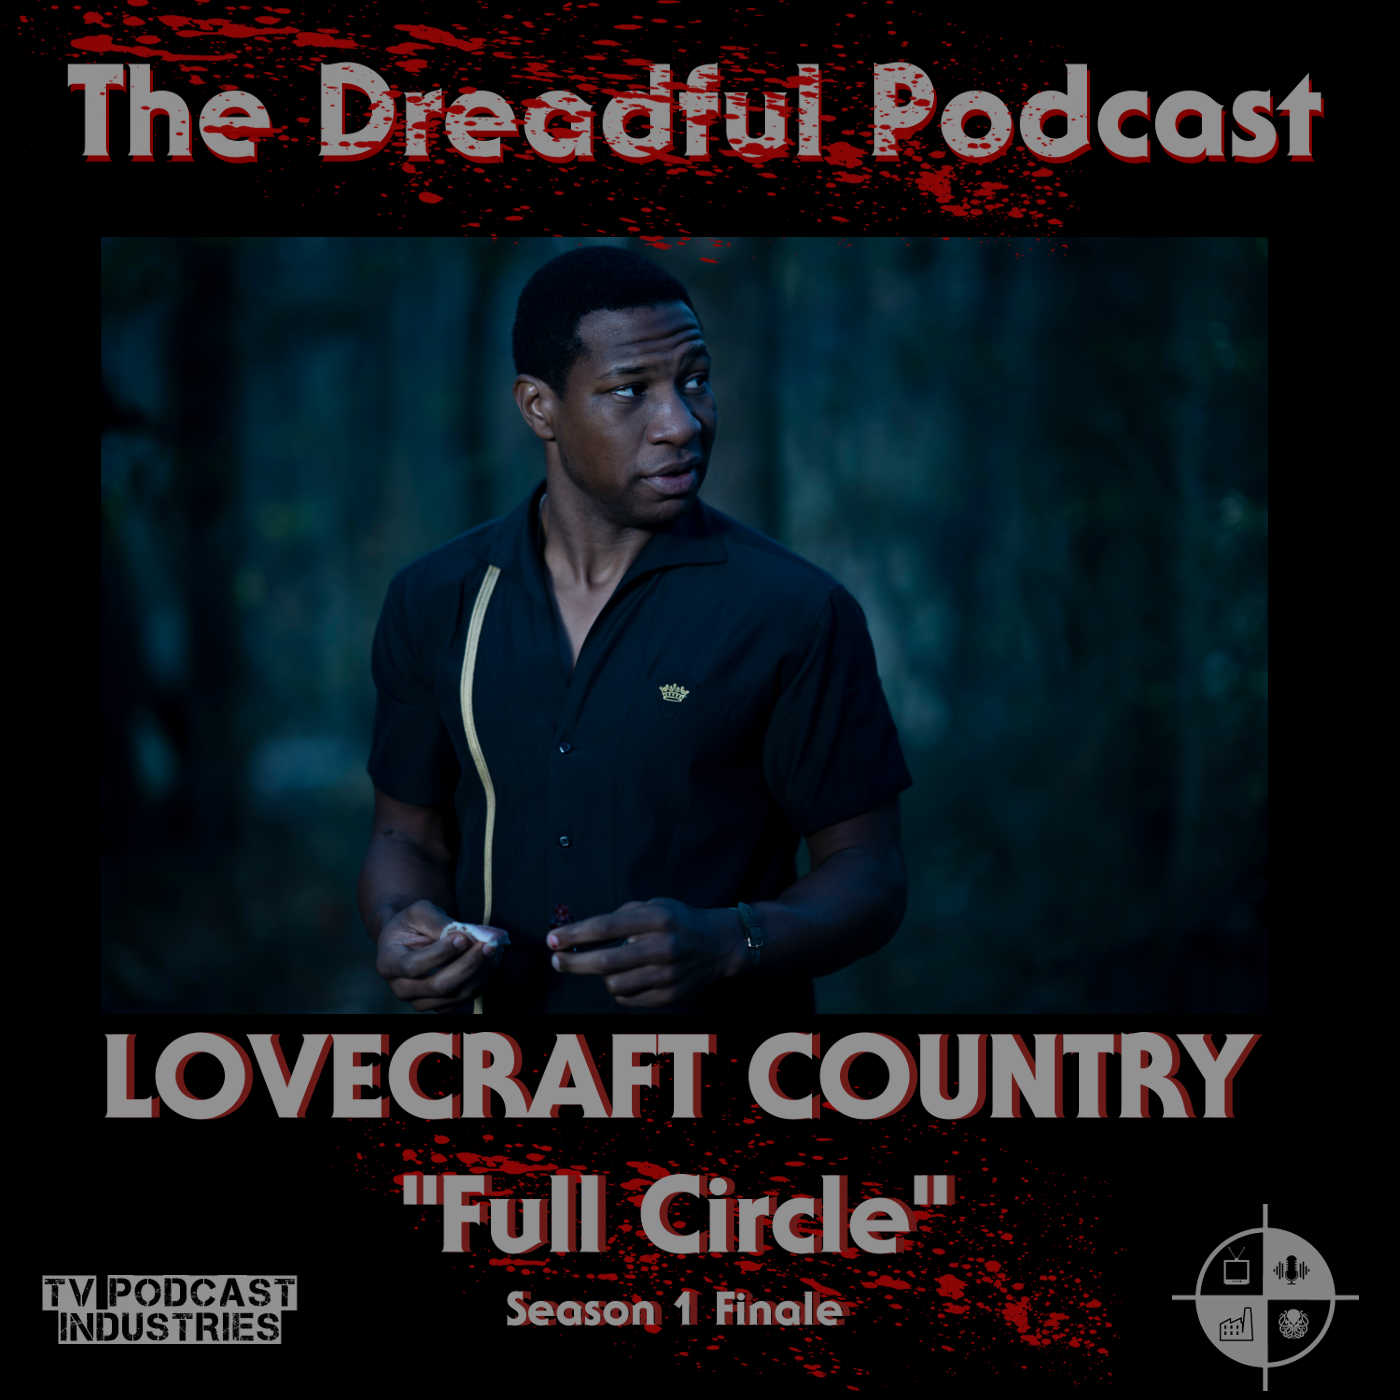 Lovecraft Country Episode 10 “Full Circle” Review